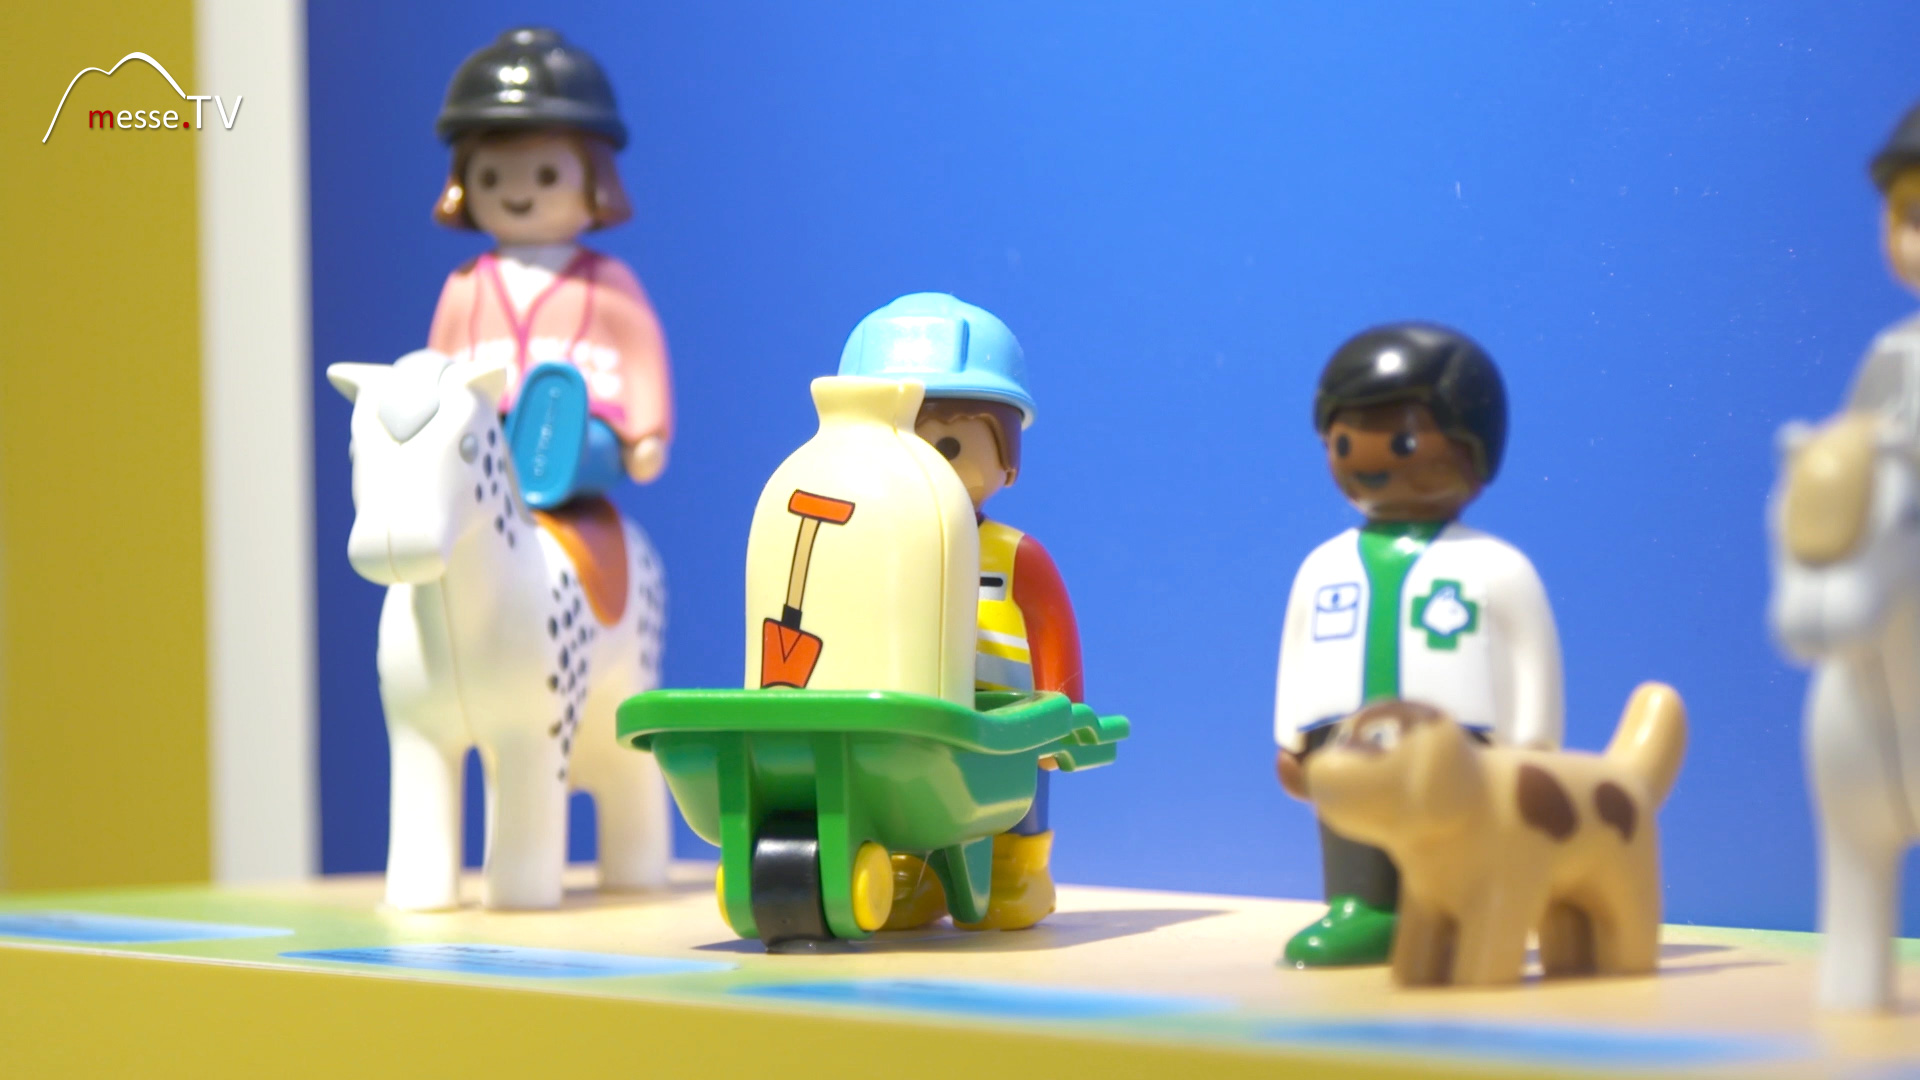 Playmobil 123 learning level 1 play figures people animals